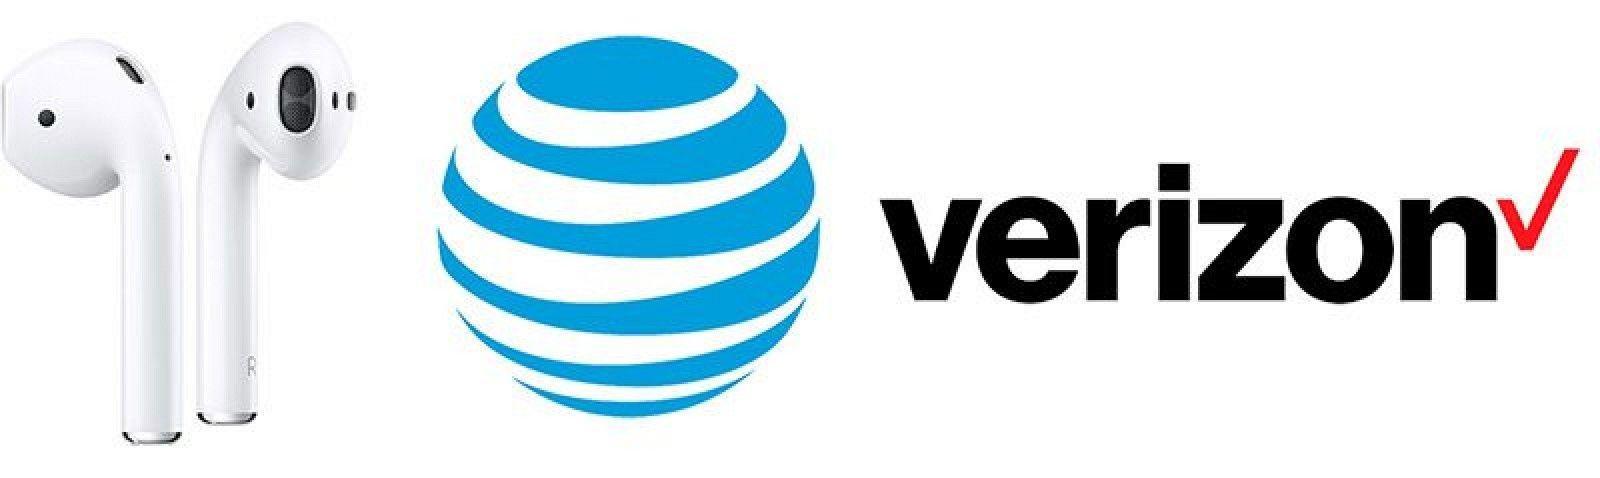 Verizon AT&T Logo - AirPods In Stock At AT&T And Verizon With Free 2 5 Day Delivery